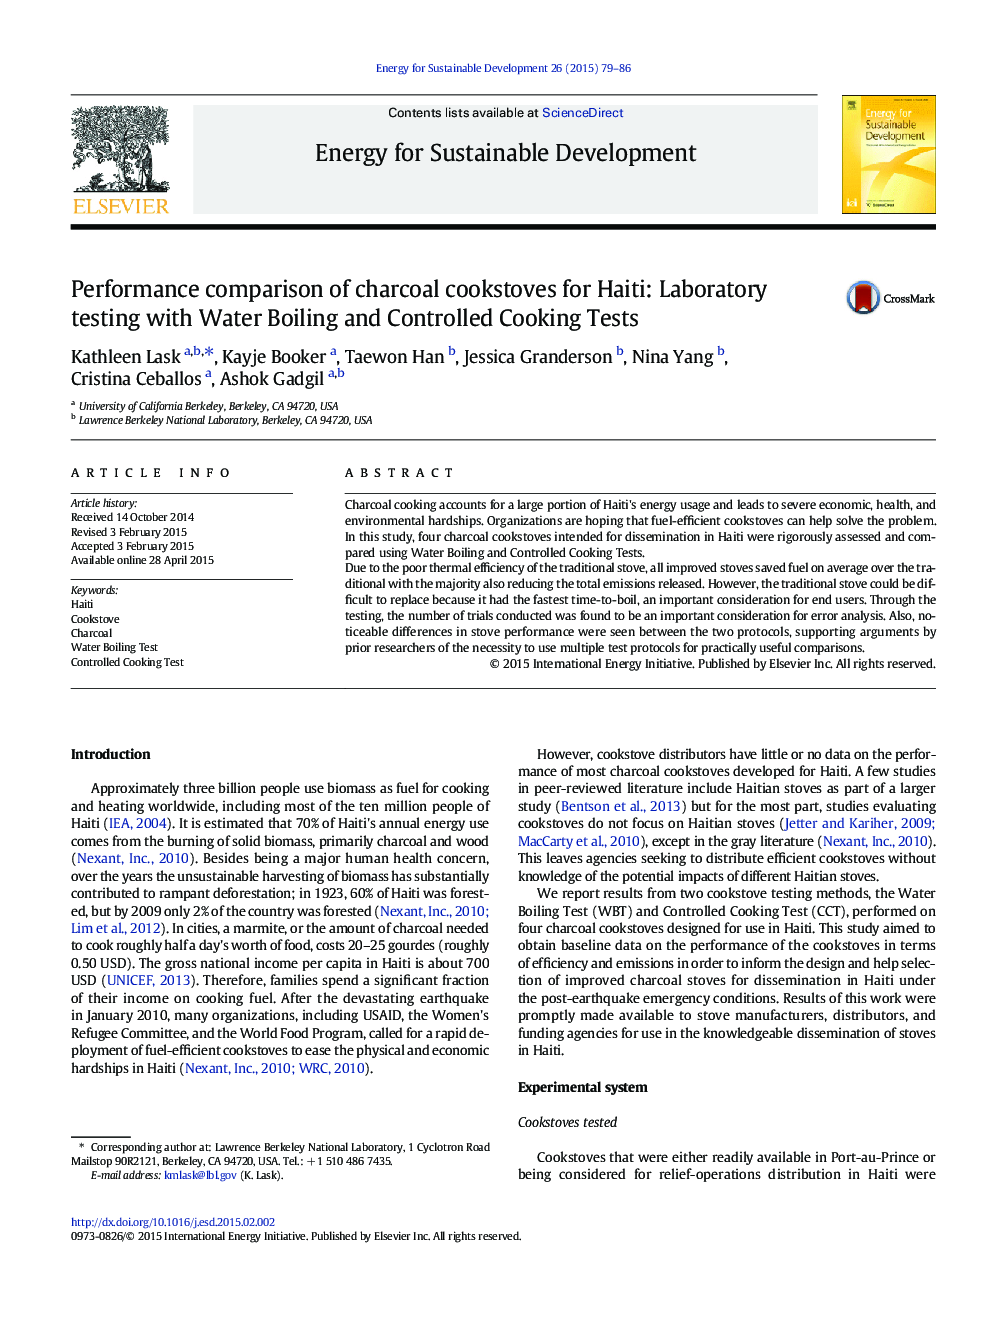 Performance comparison of charcoal cookstoves for Haiti: Laboratory testing with Water Boiling and Controlled Cooking Tests